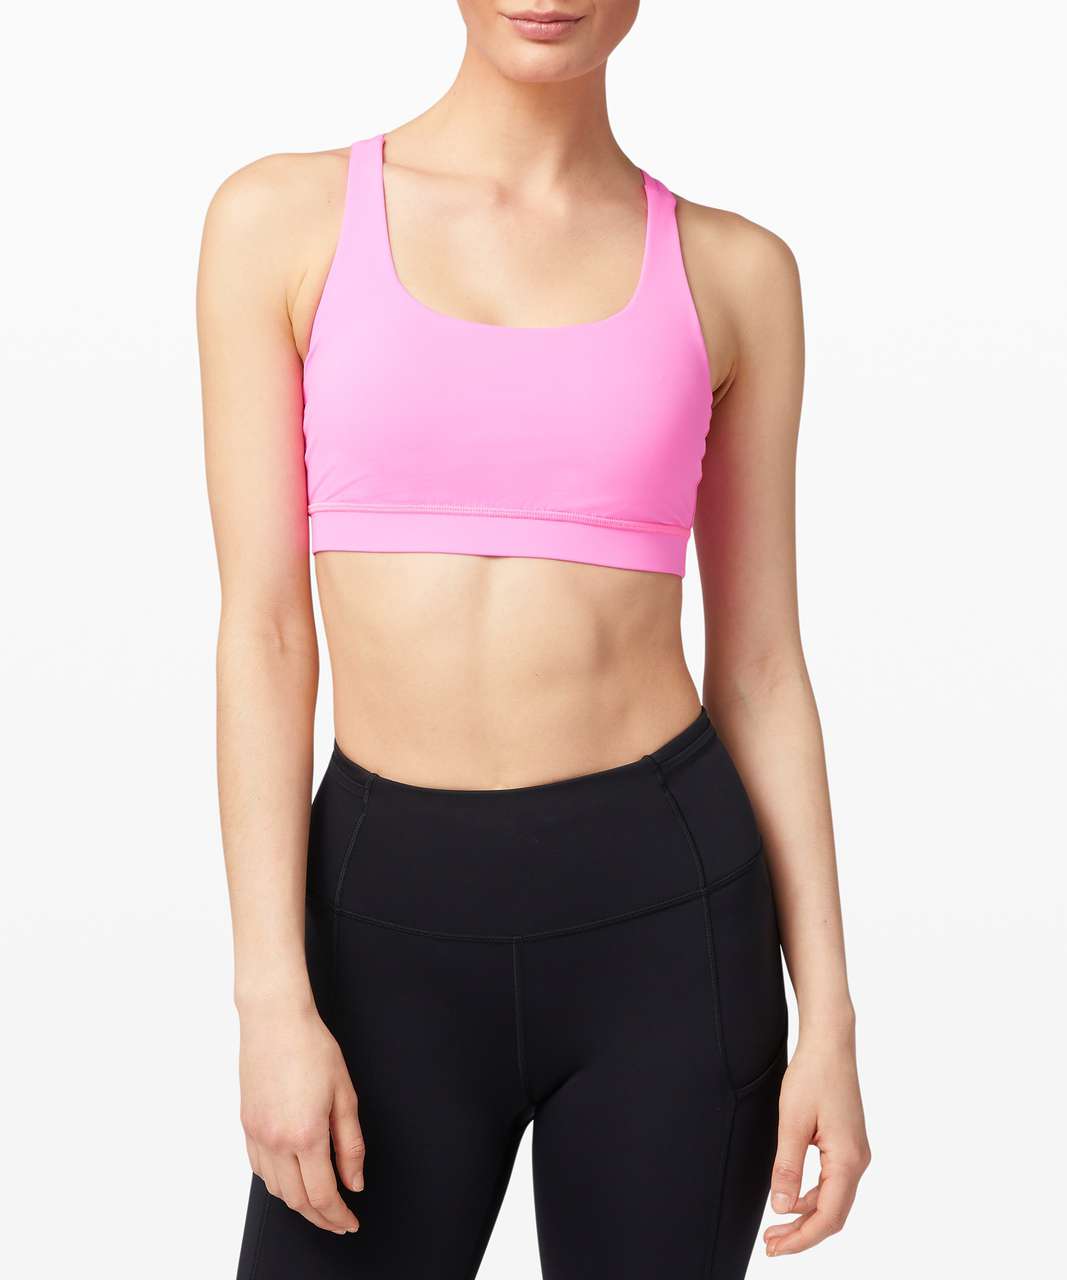 Lululemon Sports Bra Size 36 D. Pink And Some Darker Discoloration